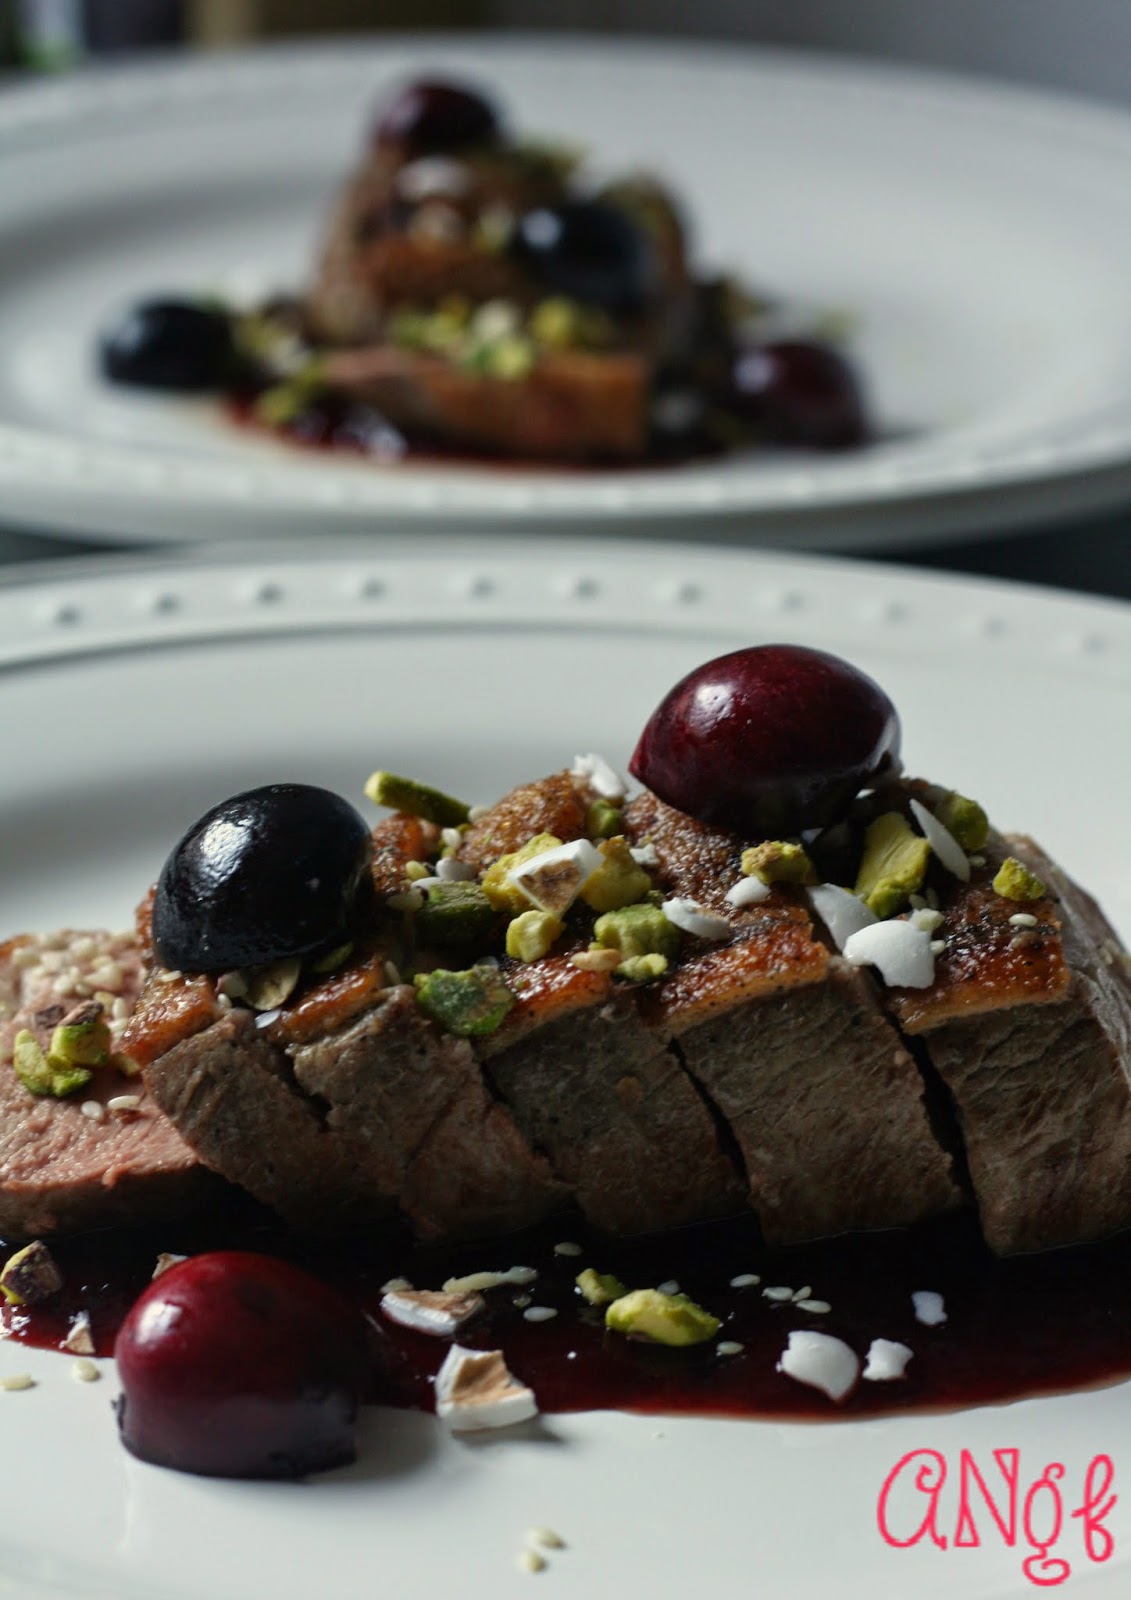 Cherries, pistachios, Jordan almonds with duck breast from Anyonita-nibbles.co.uk